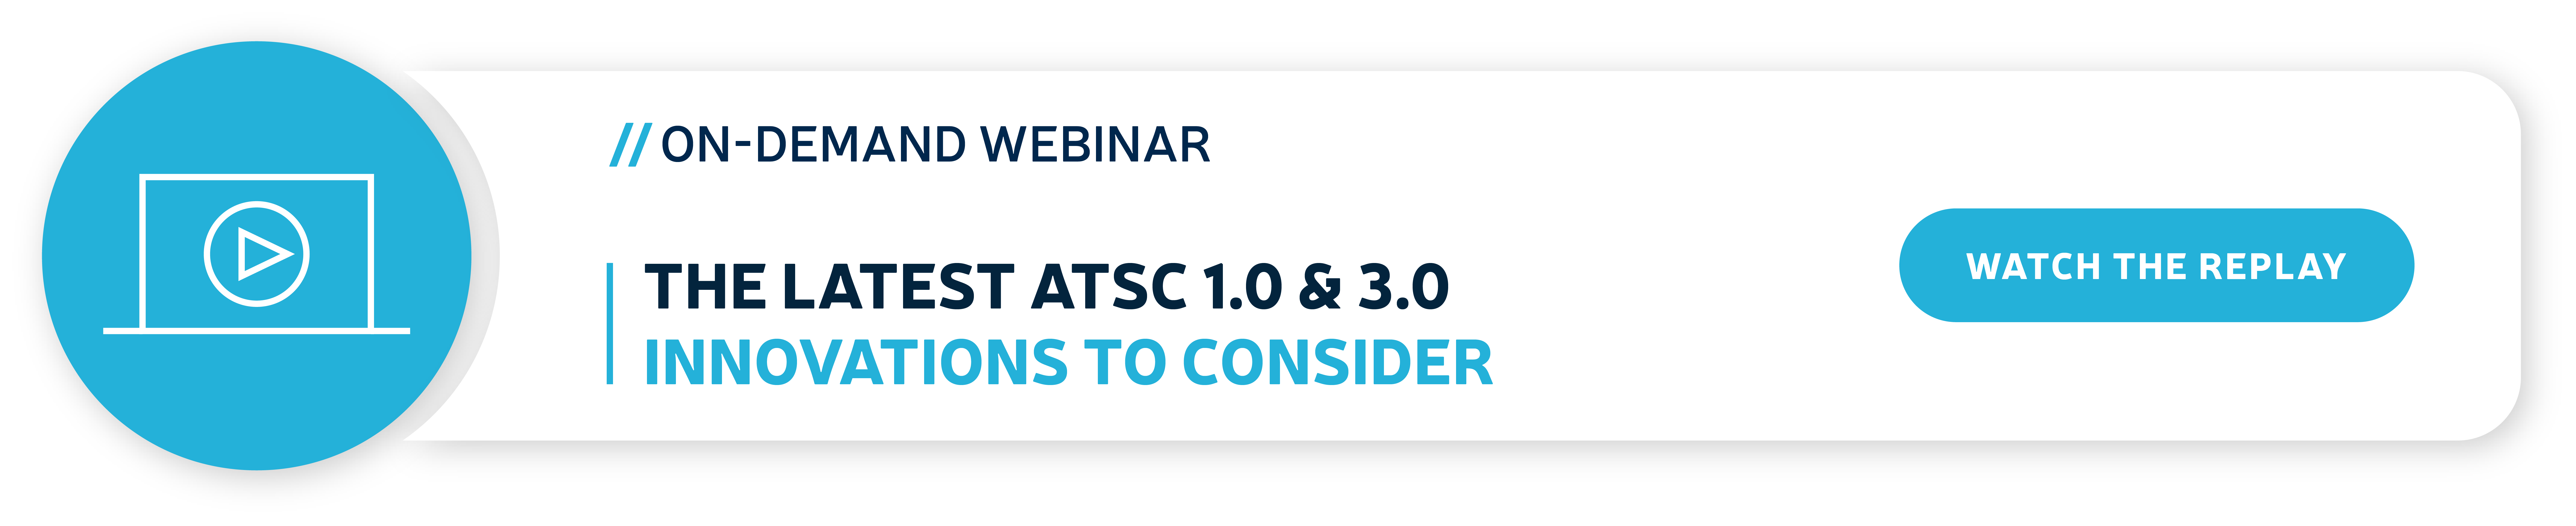 registration-banner-to-the-webinar-on-the-latest-atsc-1-0-and-3-0-innovations-to-consider